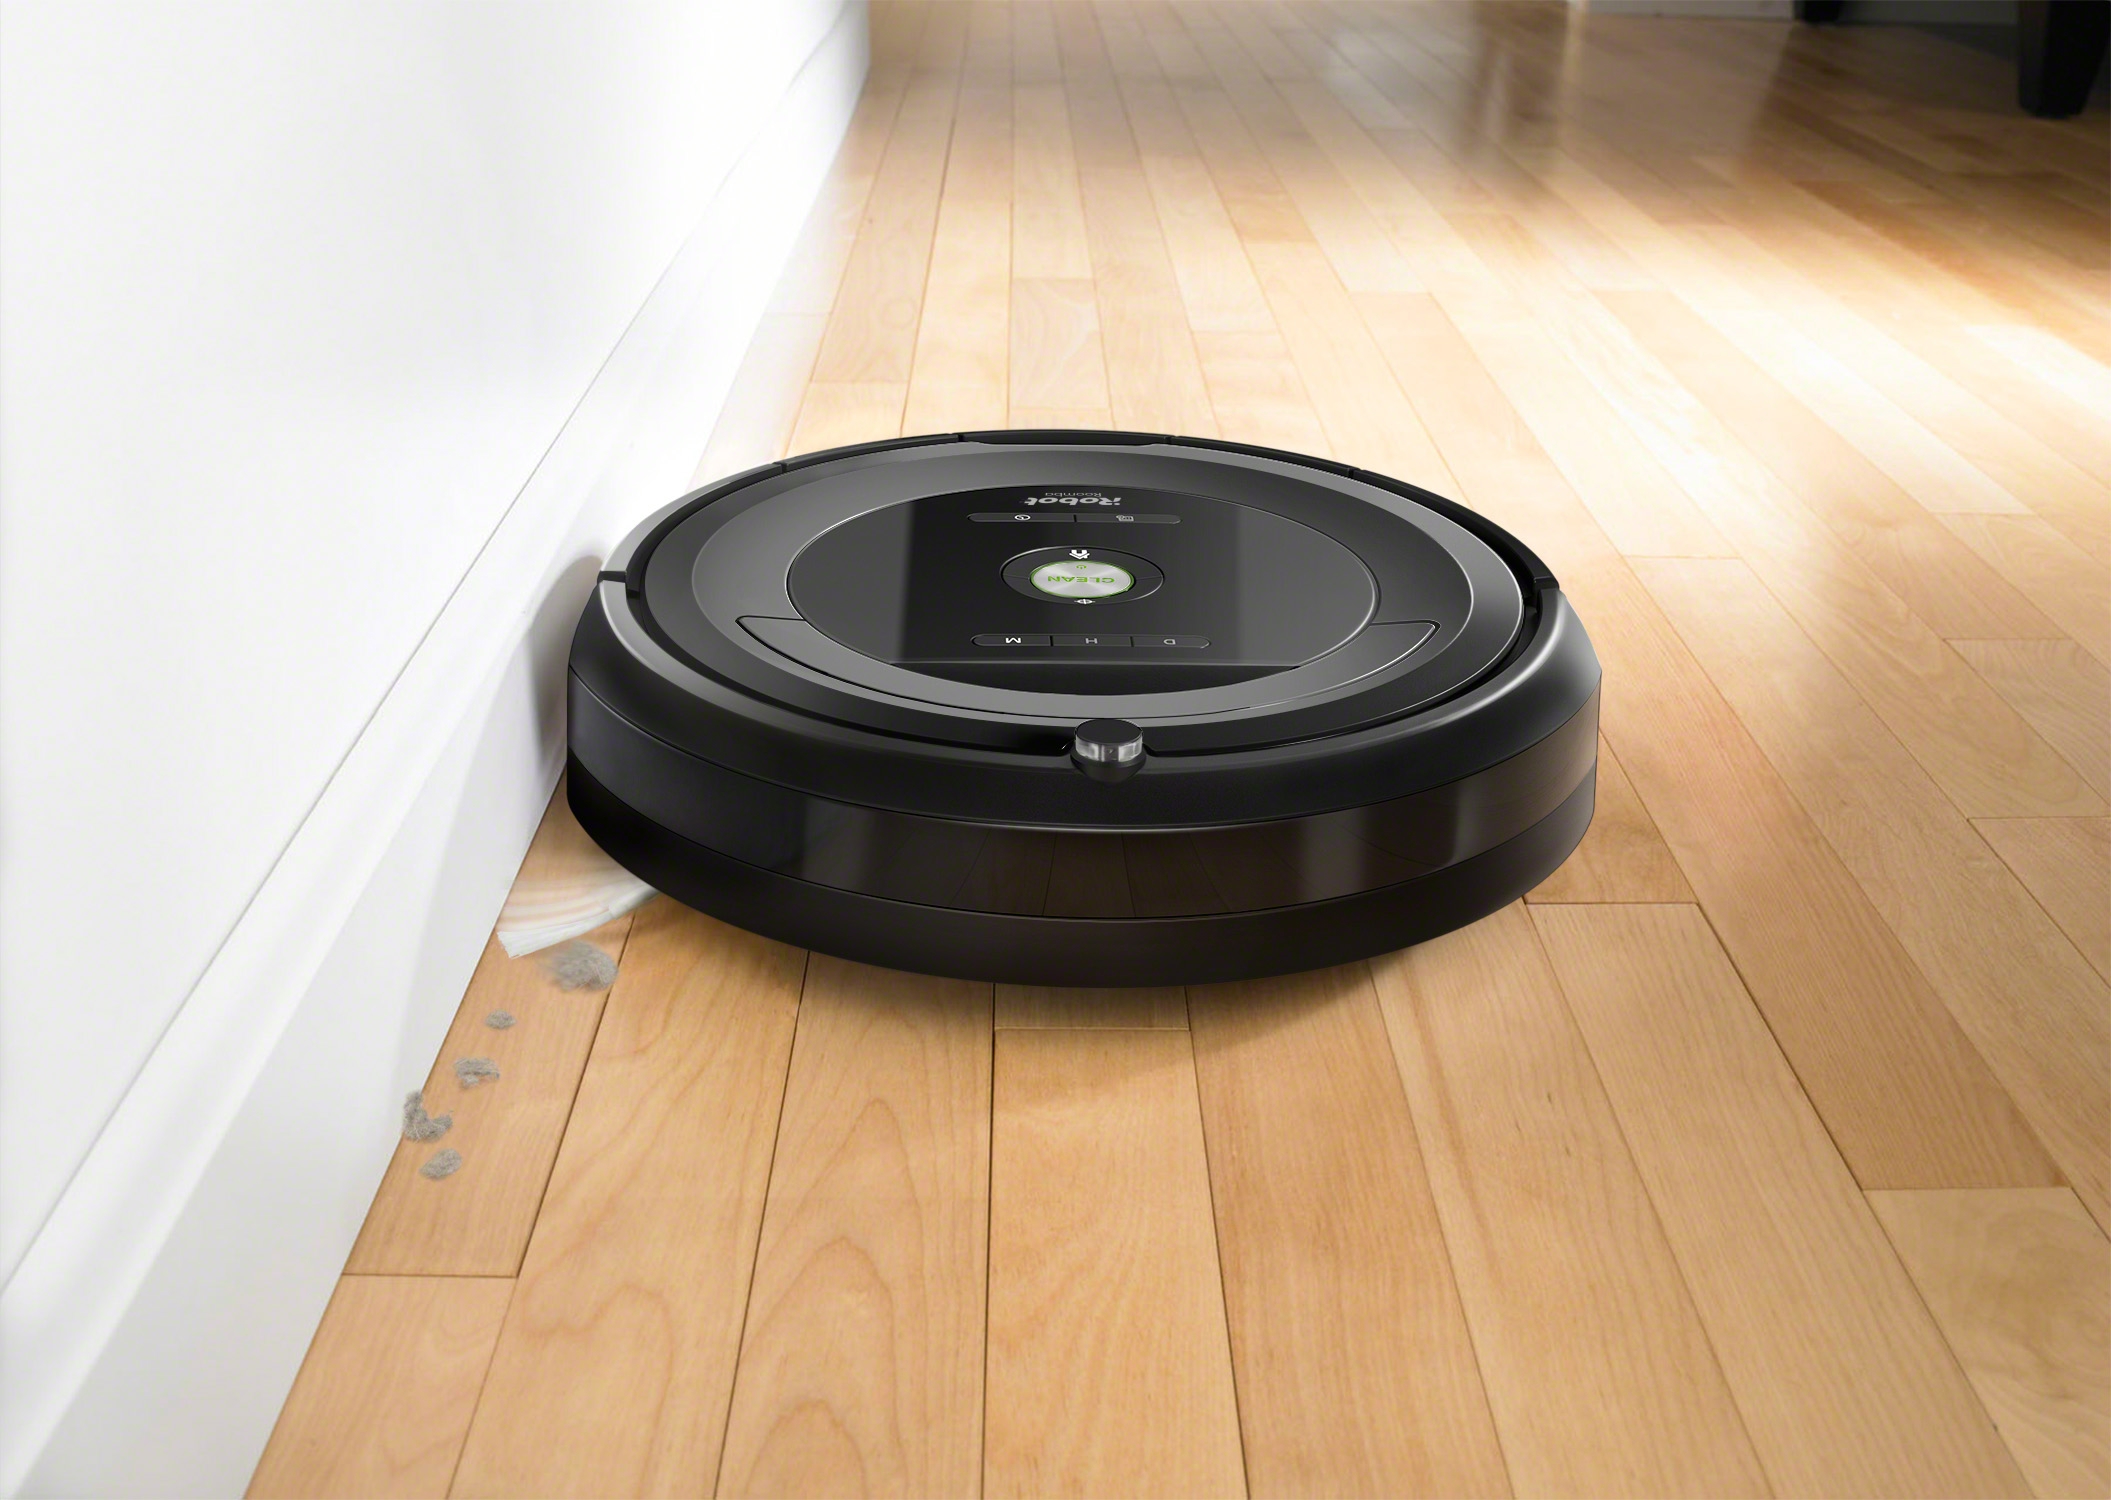 Roomba by iRobot 680 Robot Vacuum with Manufacturer's Warranty - image 3 of 8